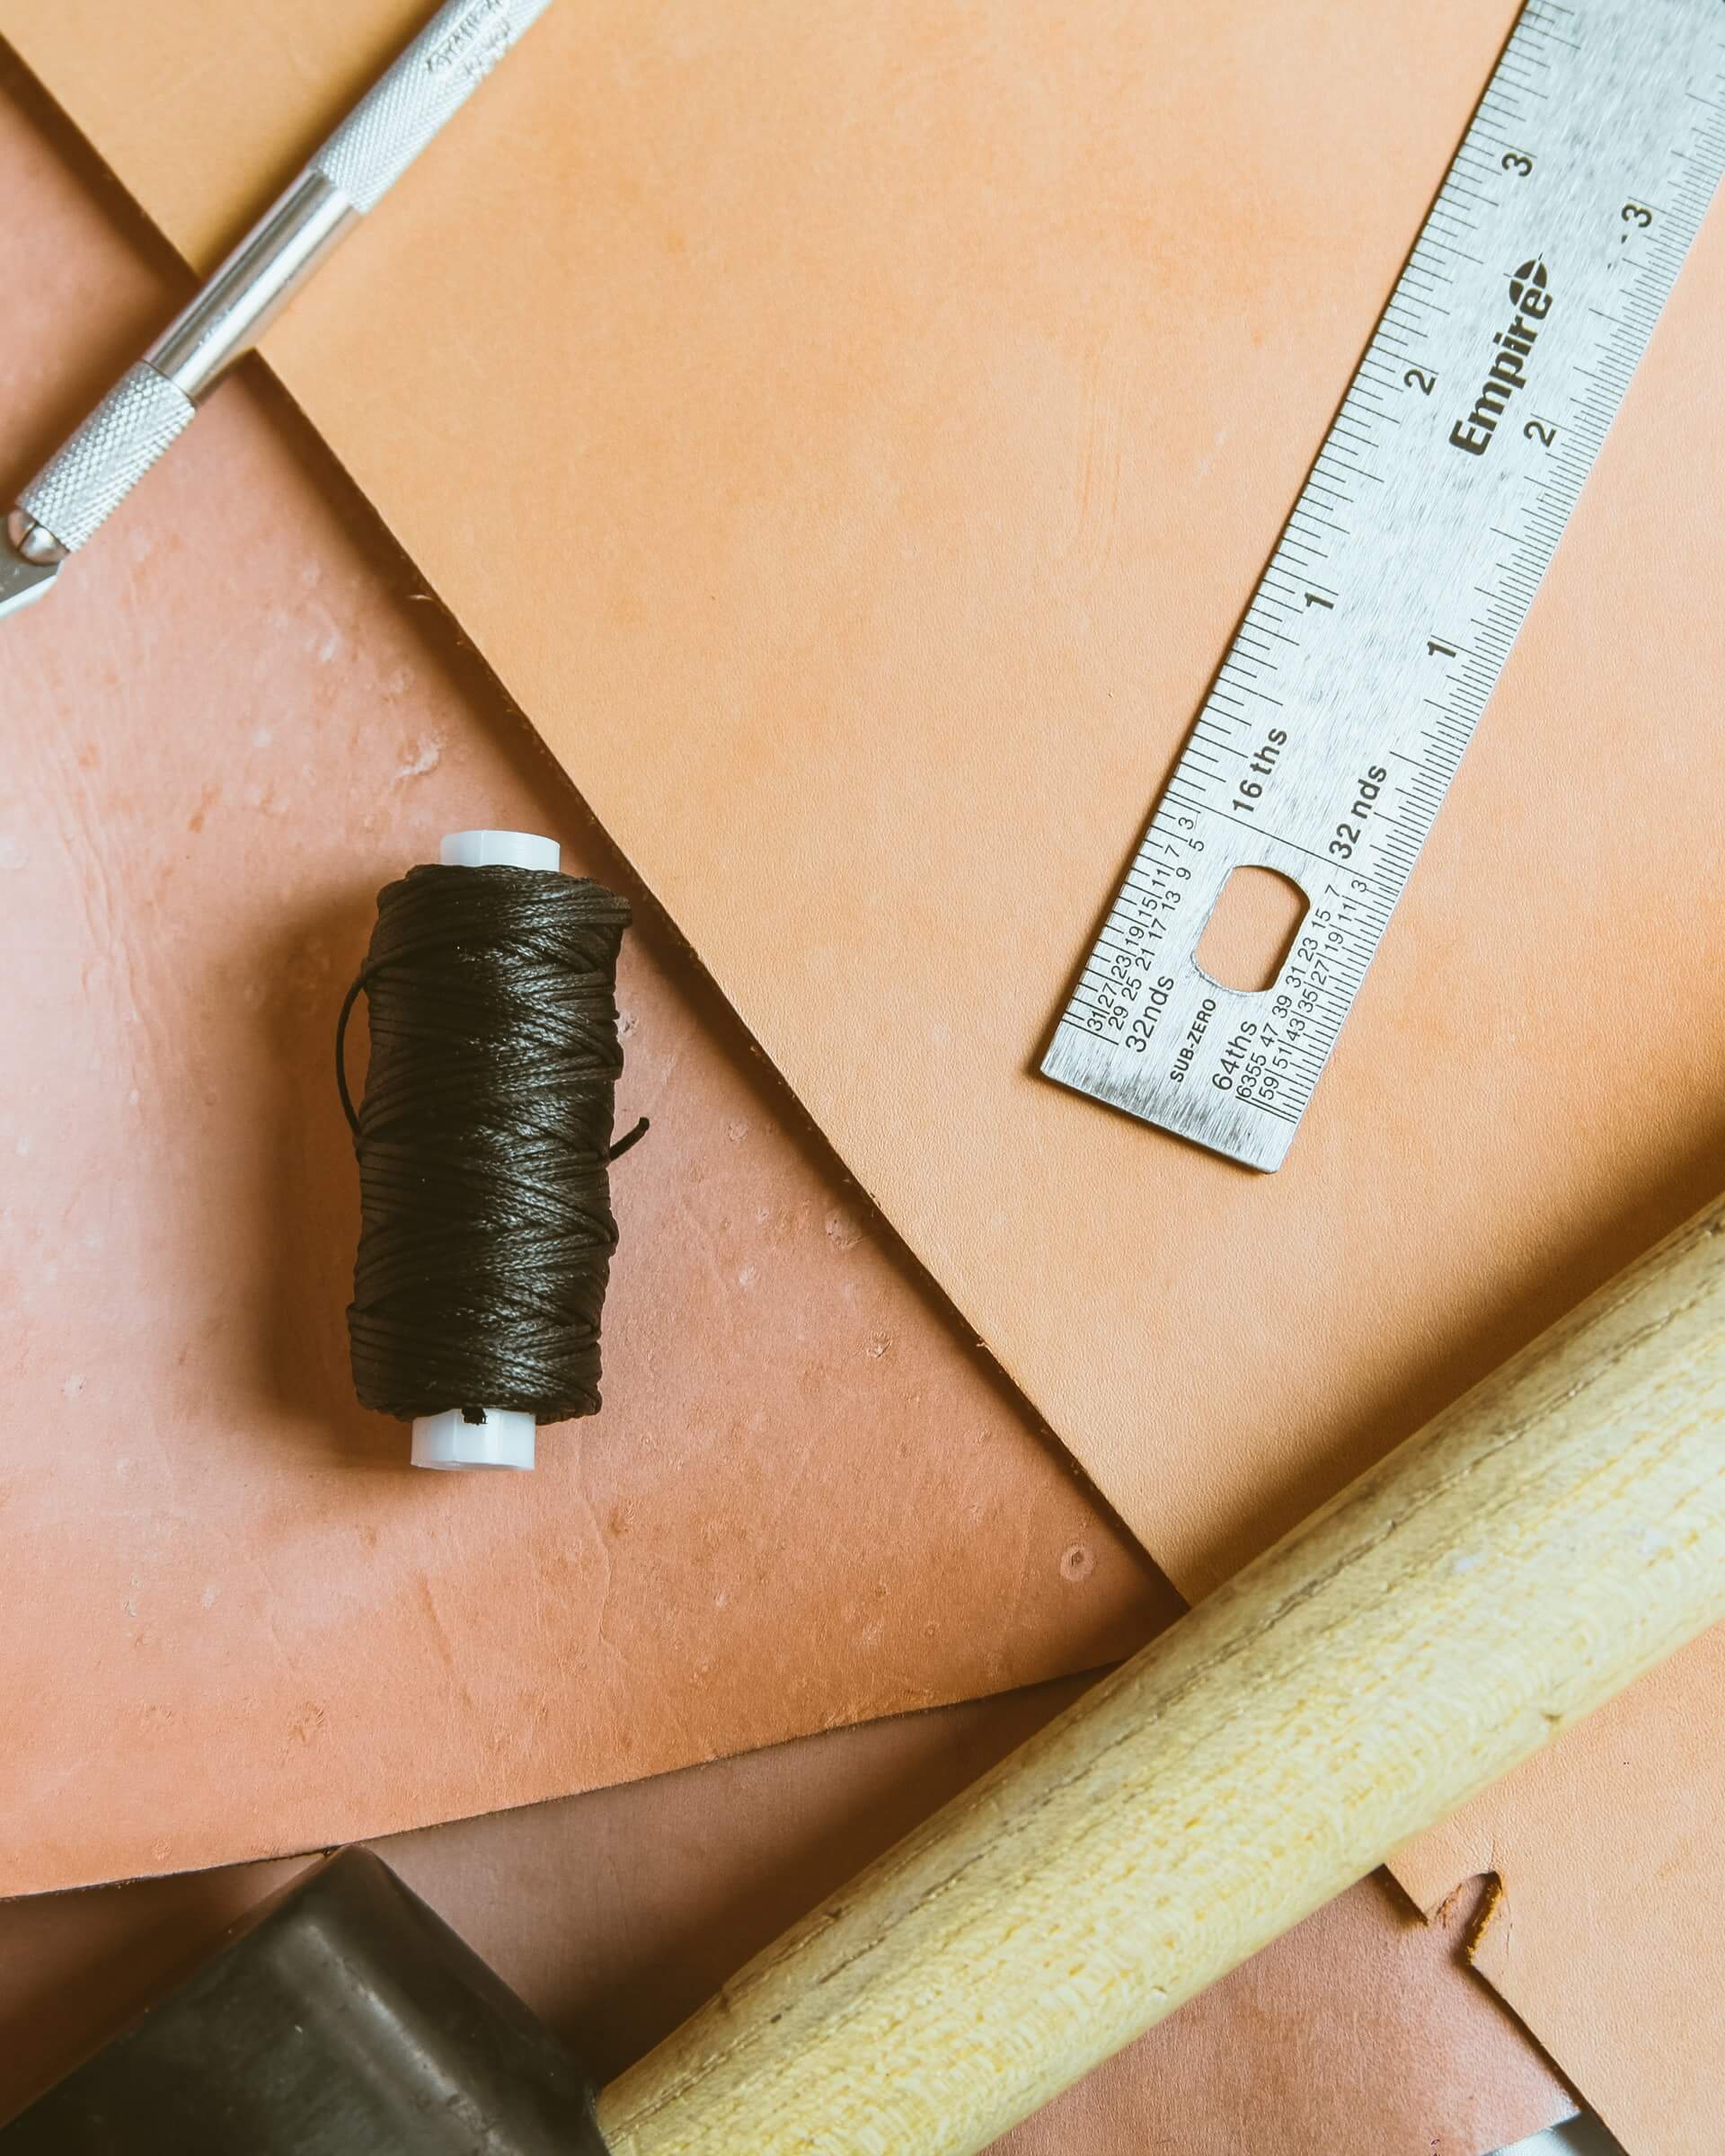 Leather Industry Jargon: What Does It All Mean? - Leather Belt Blog | Roger Ximenez: Bespoke Maker of Fine Leather Goods